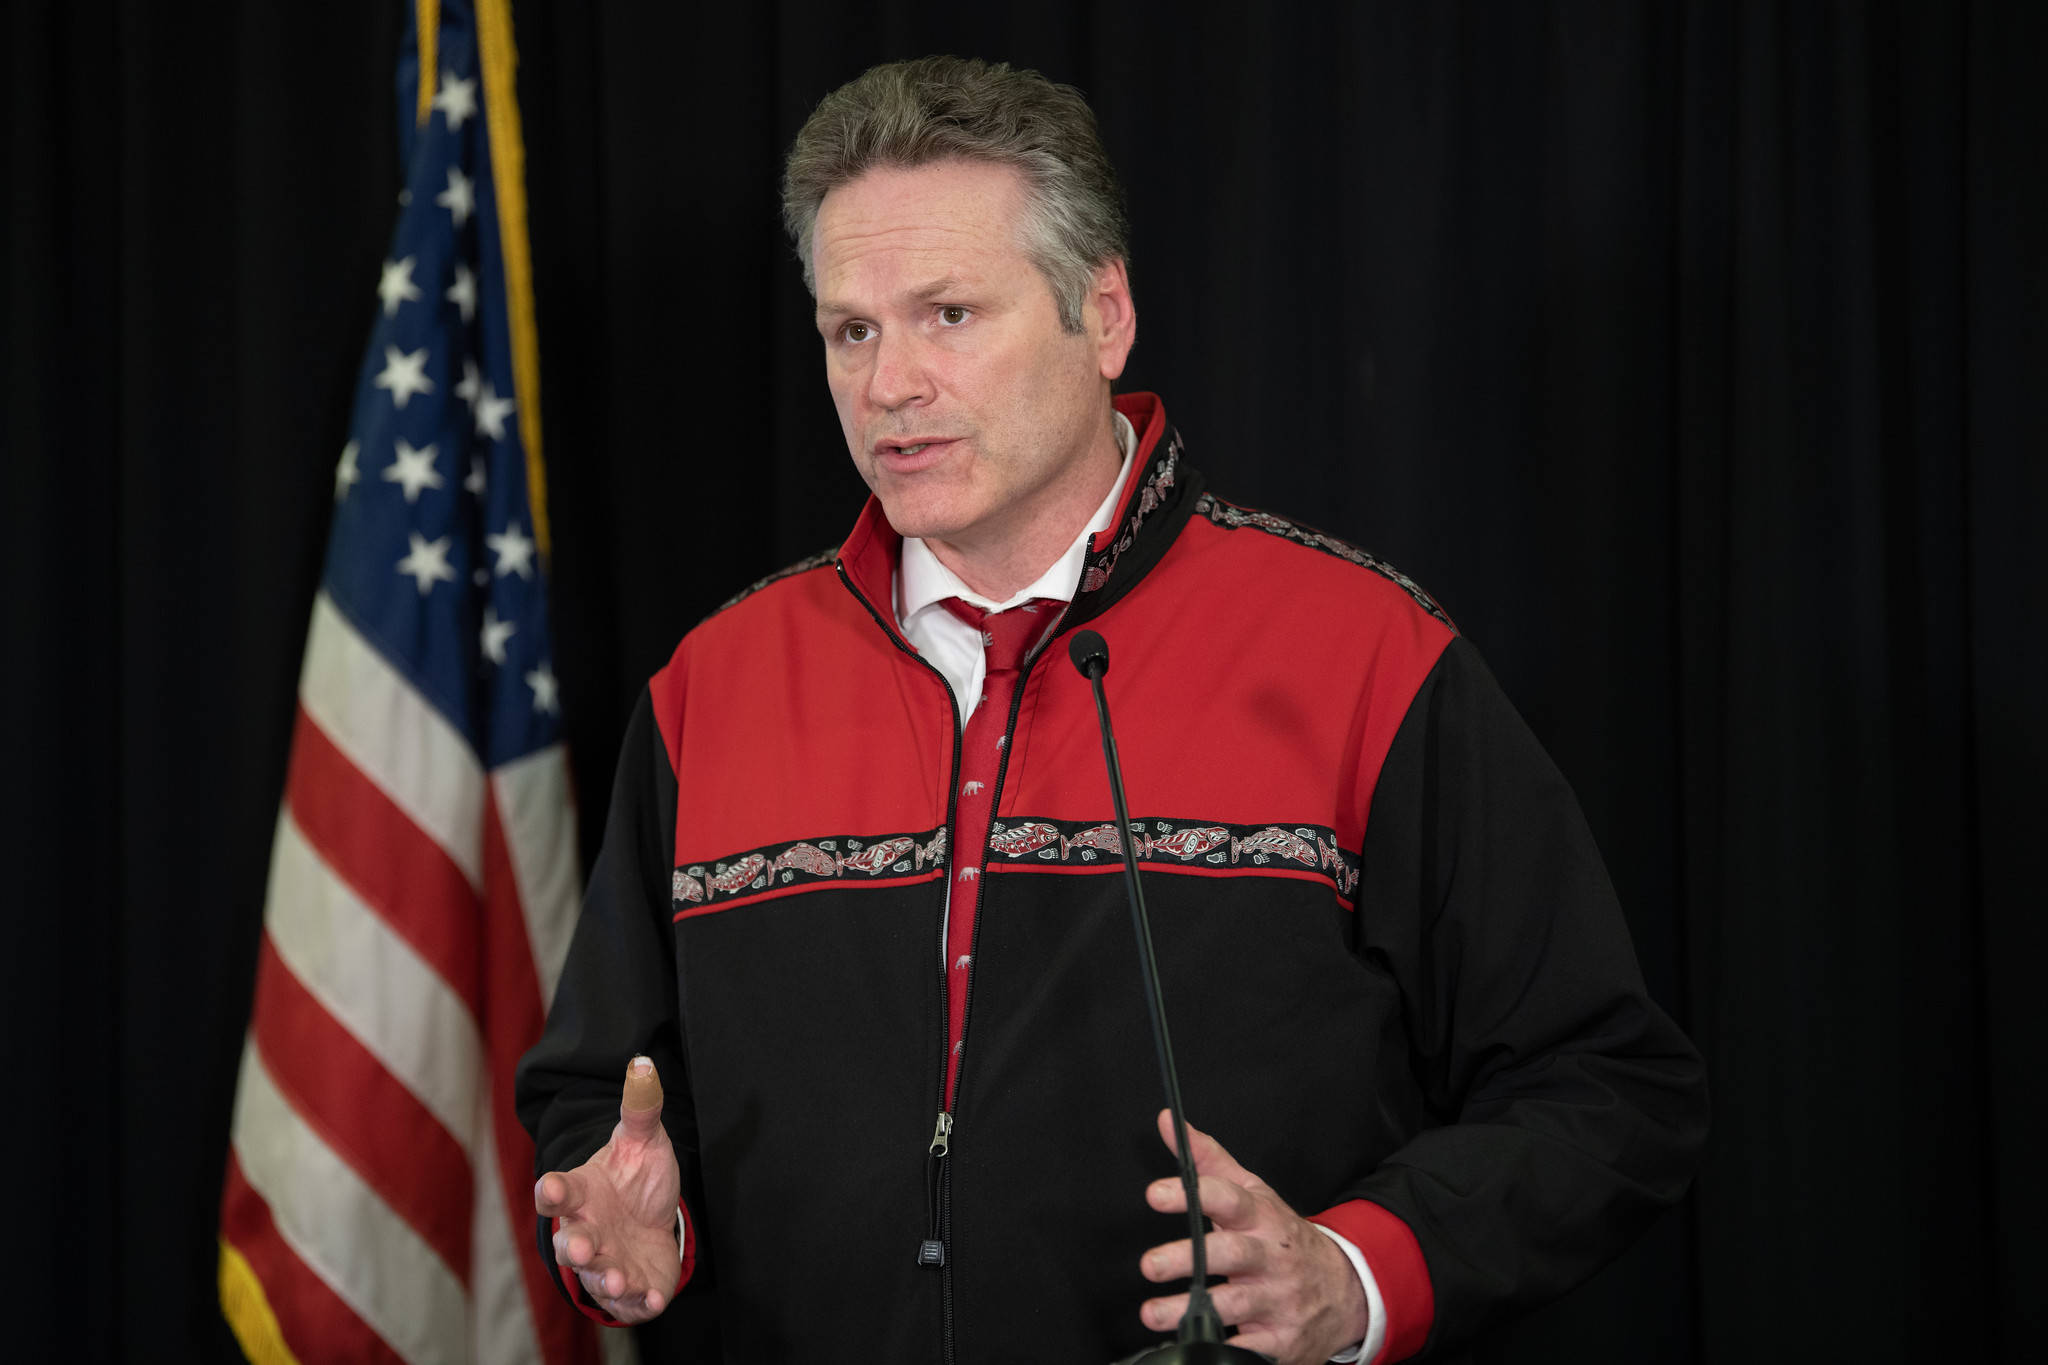 Dunleavy wants to get economy going again, slowly and safely